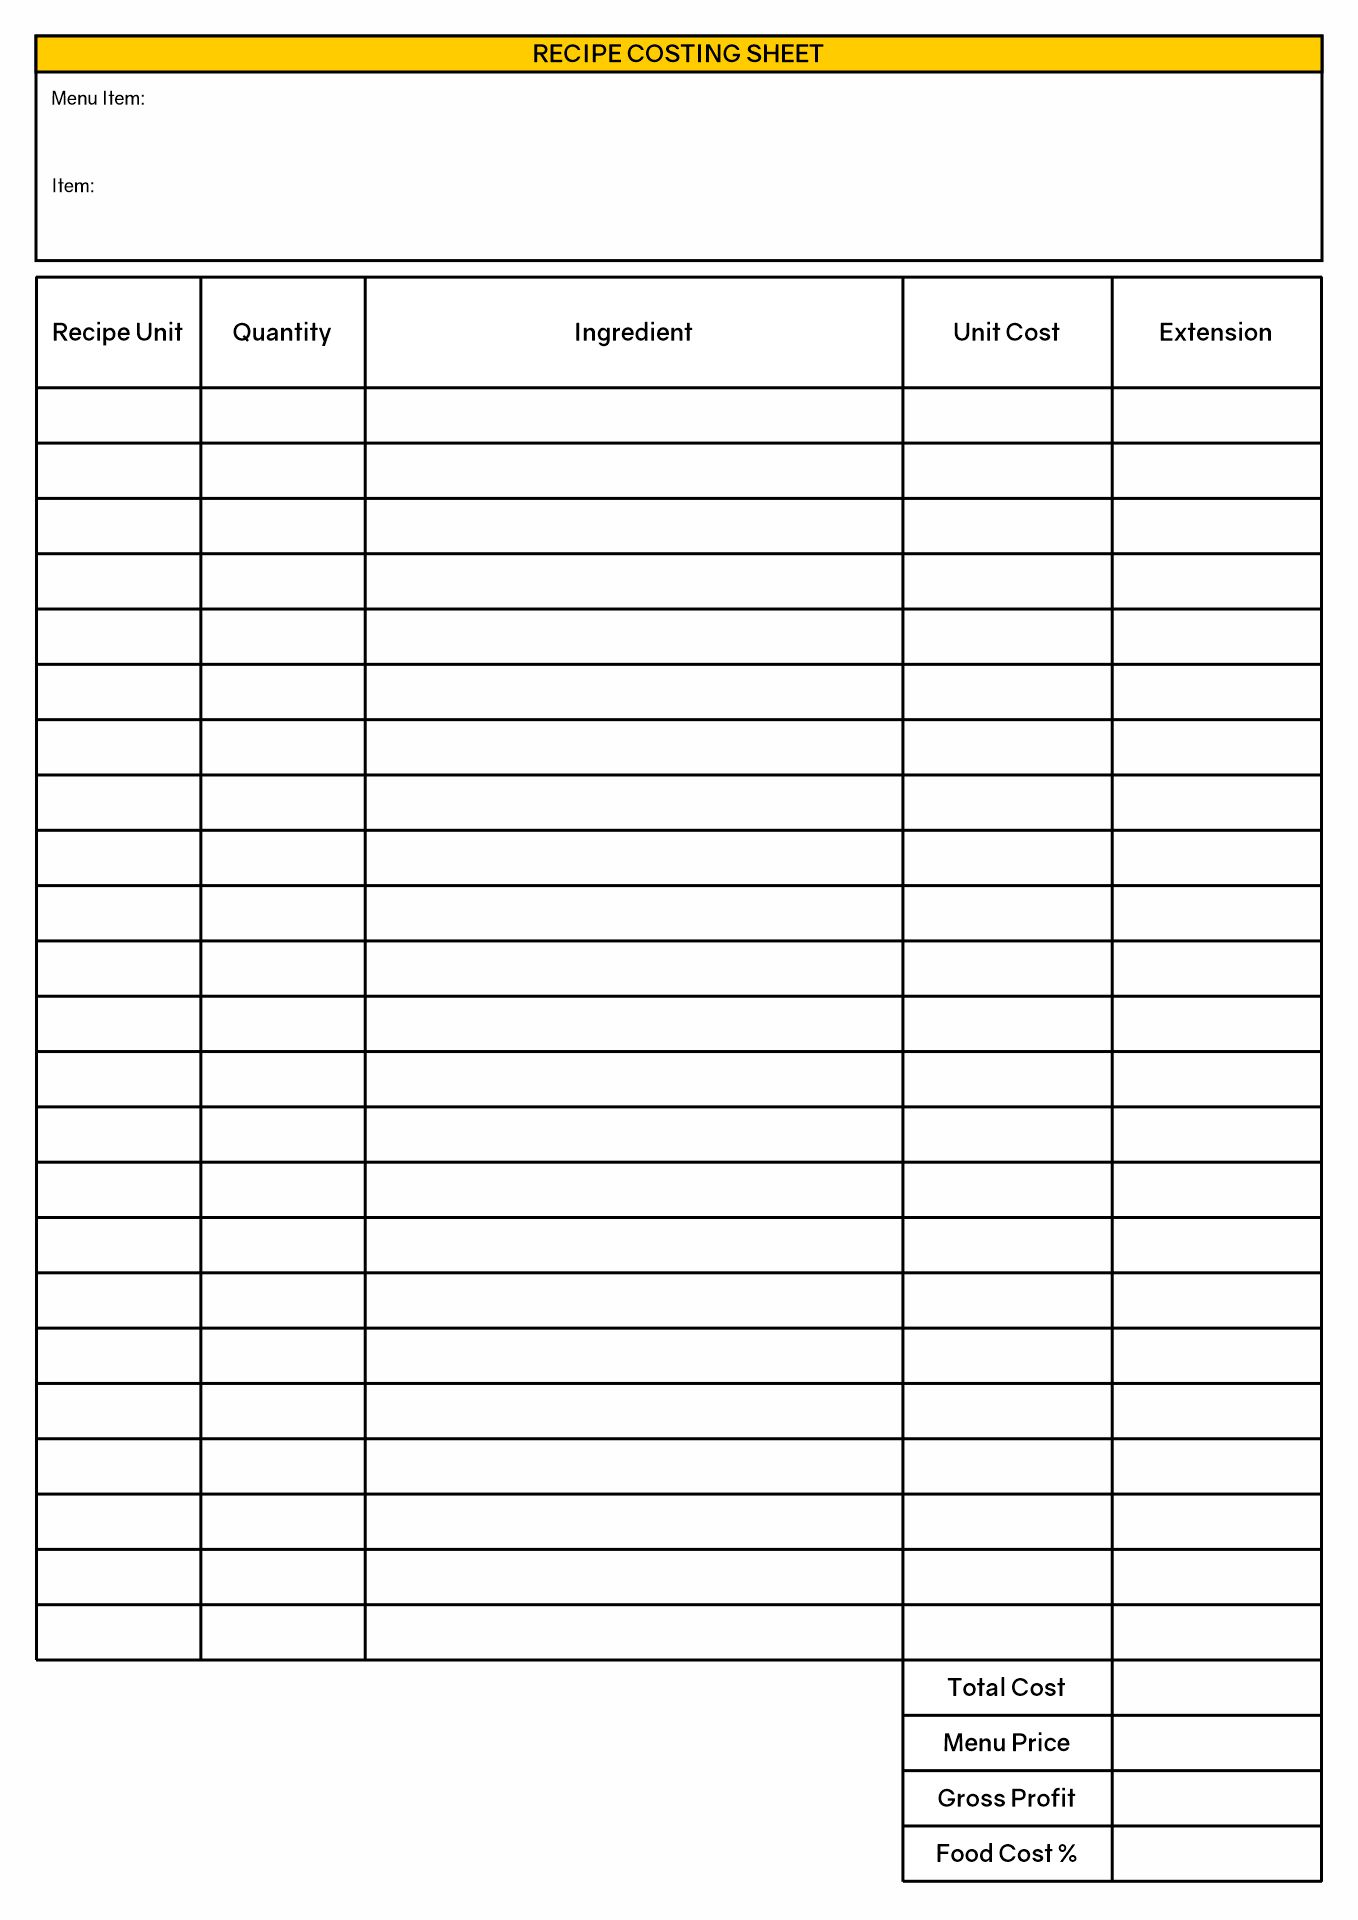 Recipe Costing Sheet Template Image